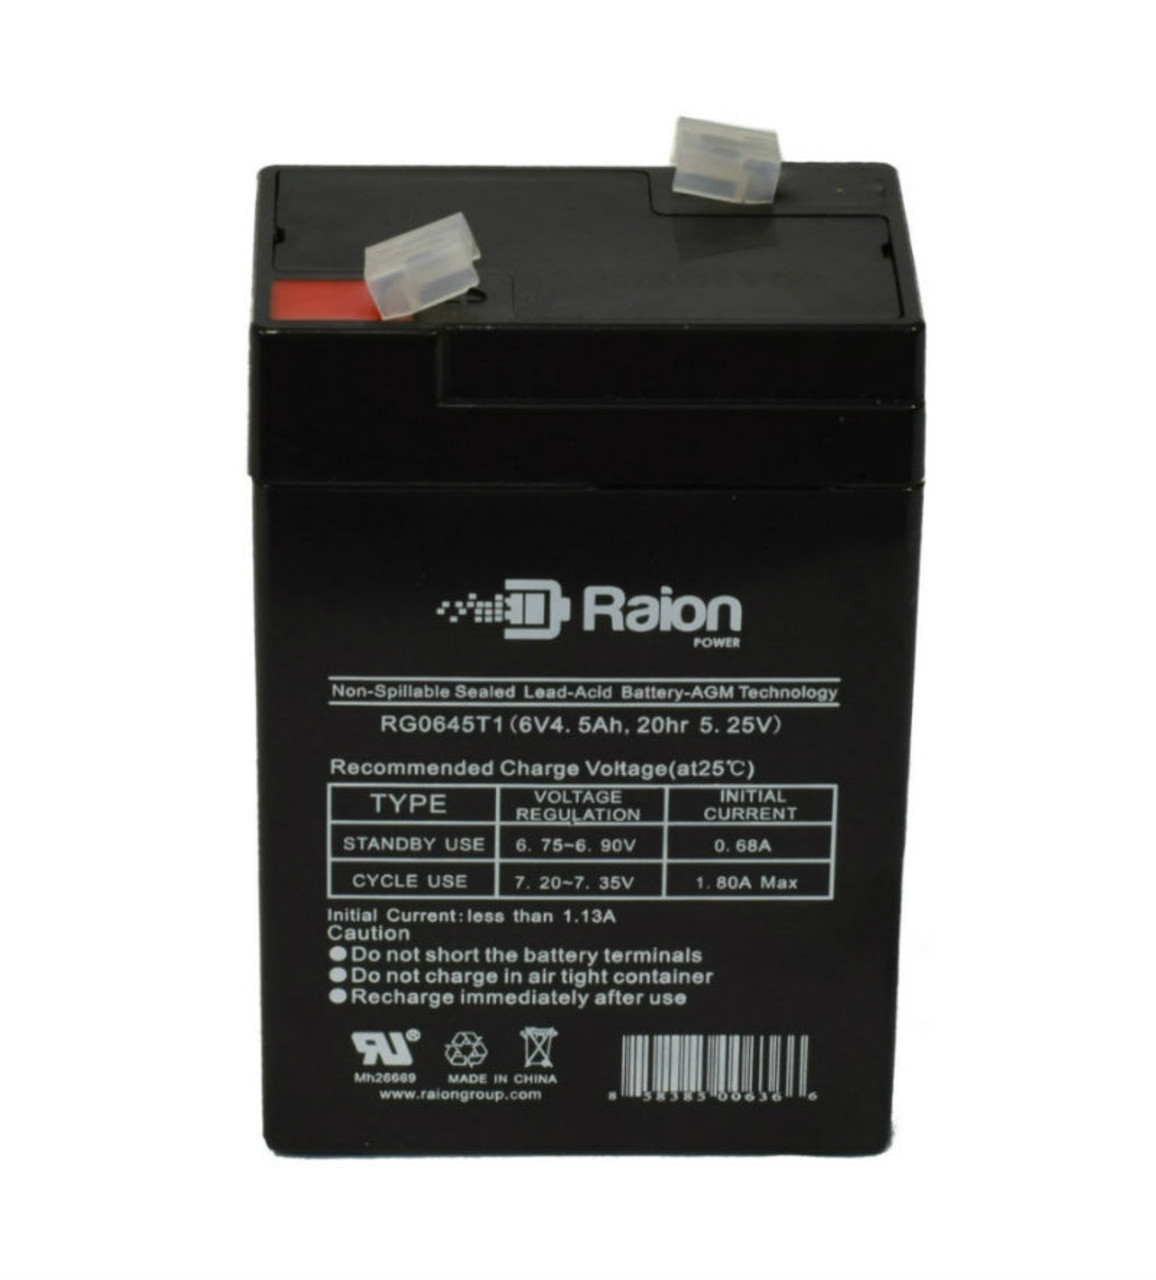 Raion Power RG0645T1 Replacement Battery Cartridge for Sentry Lite SCR52520